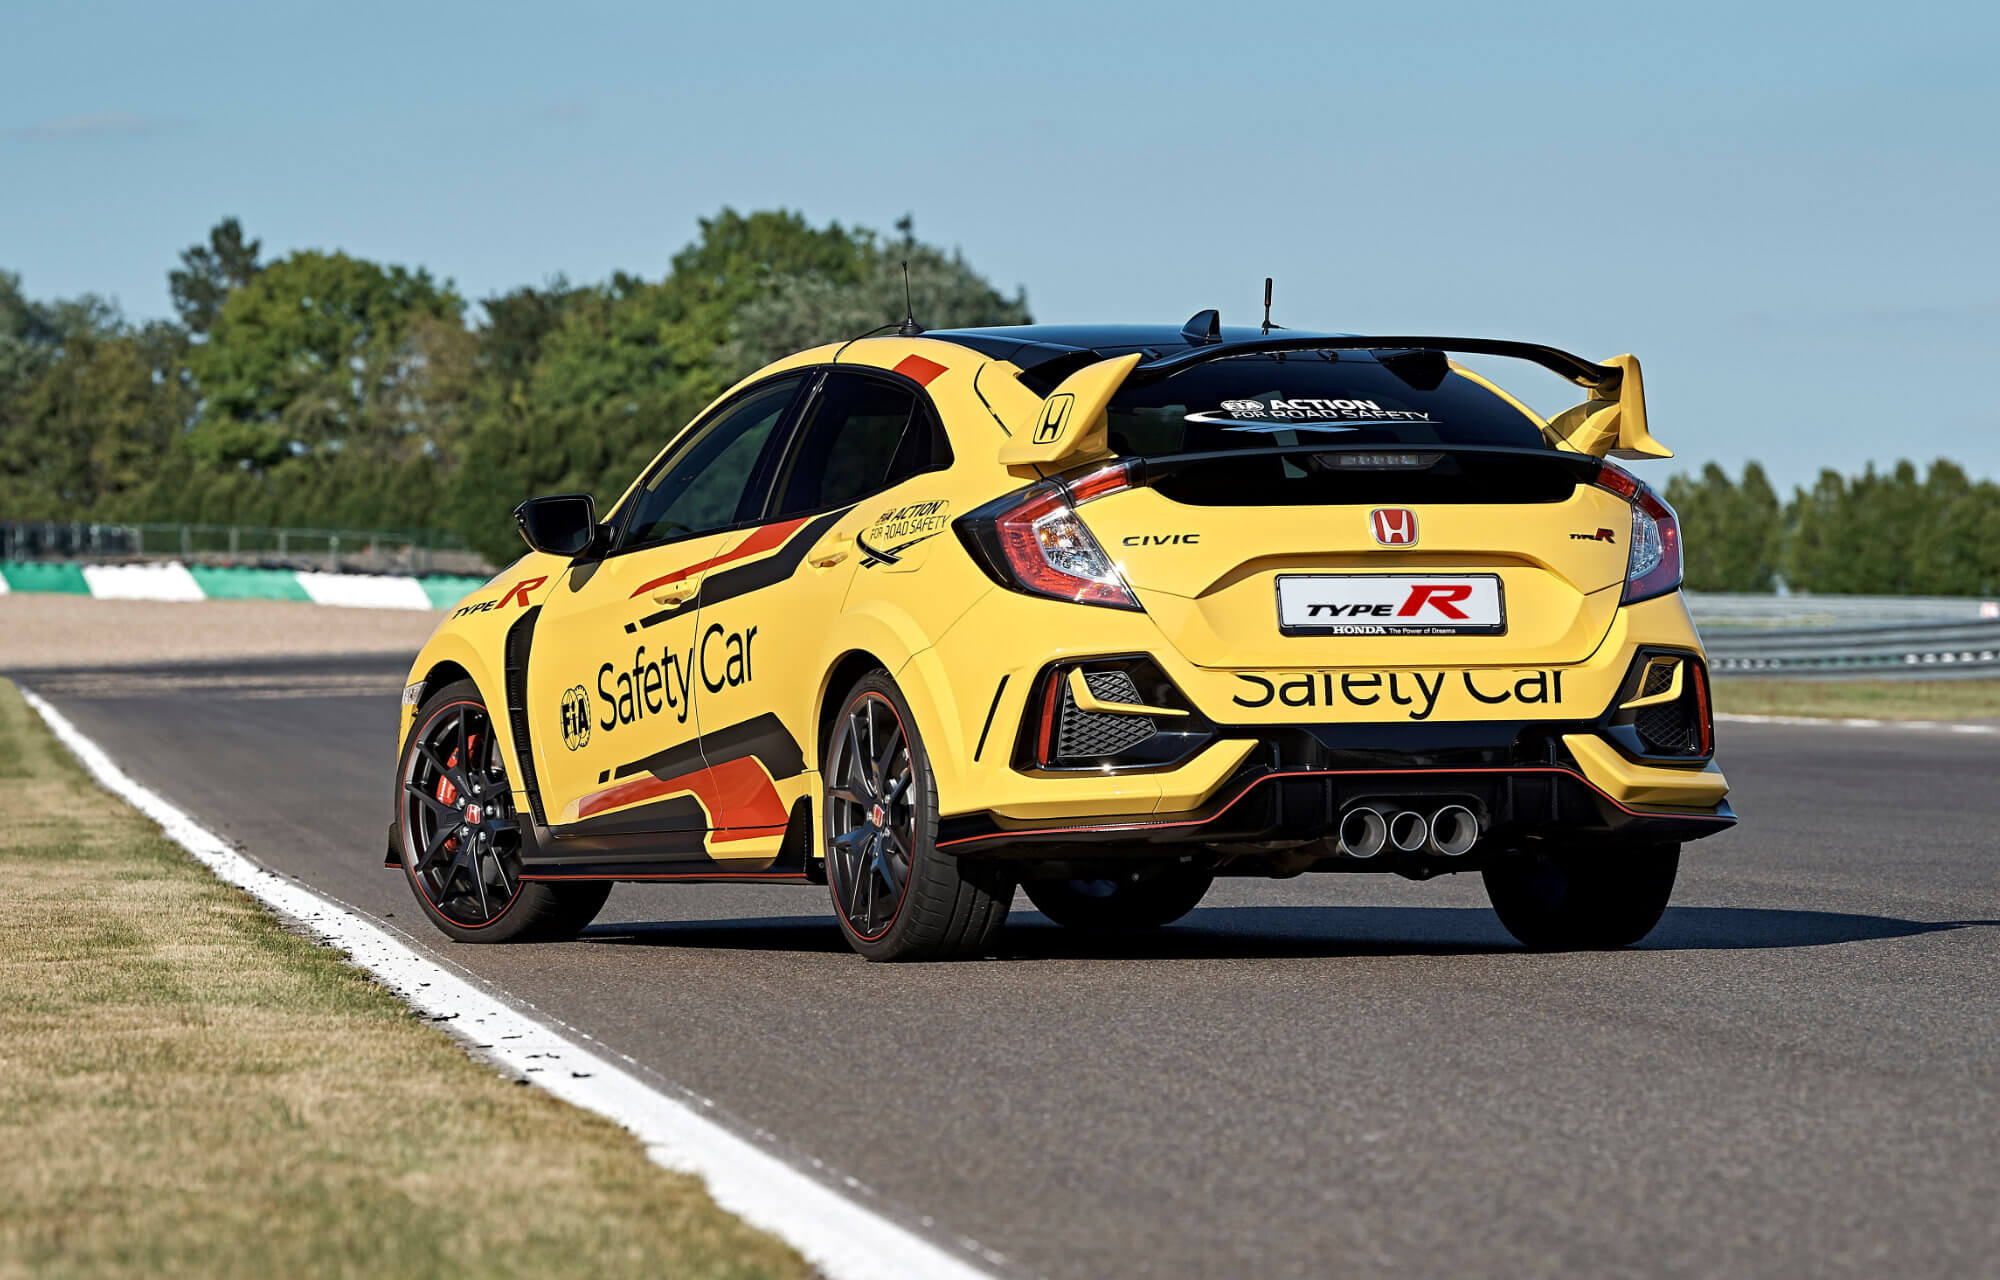 Civic Type R Limited Edition: 2020 WTCR Official Safety Car